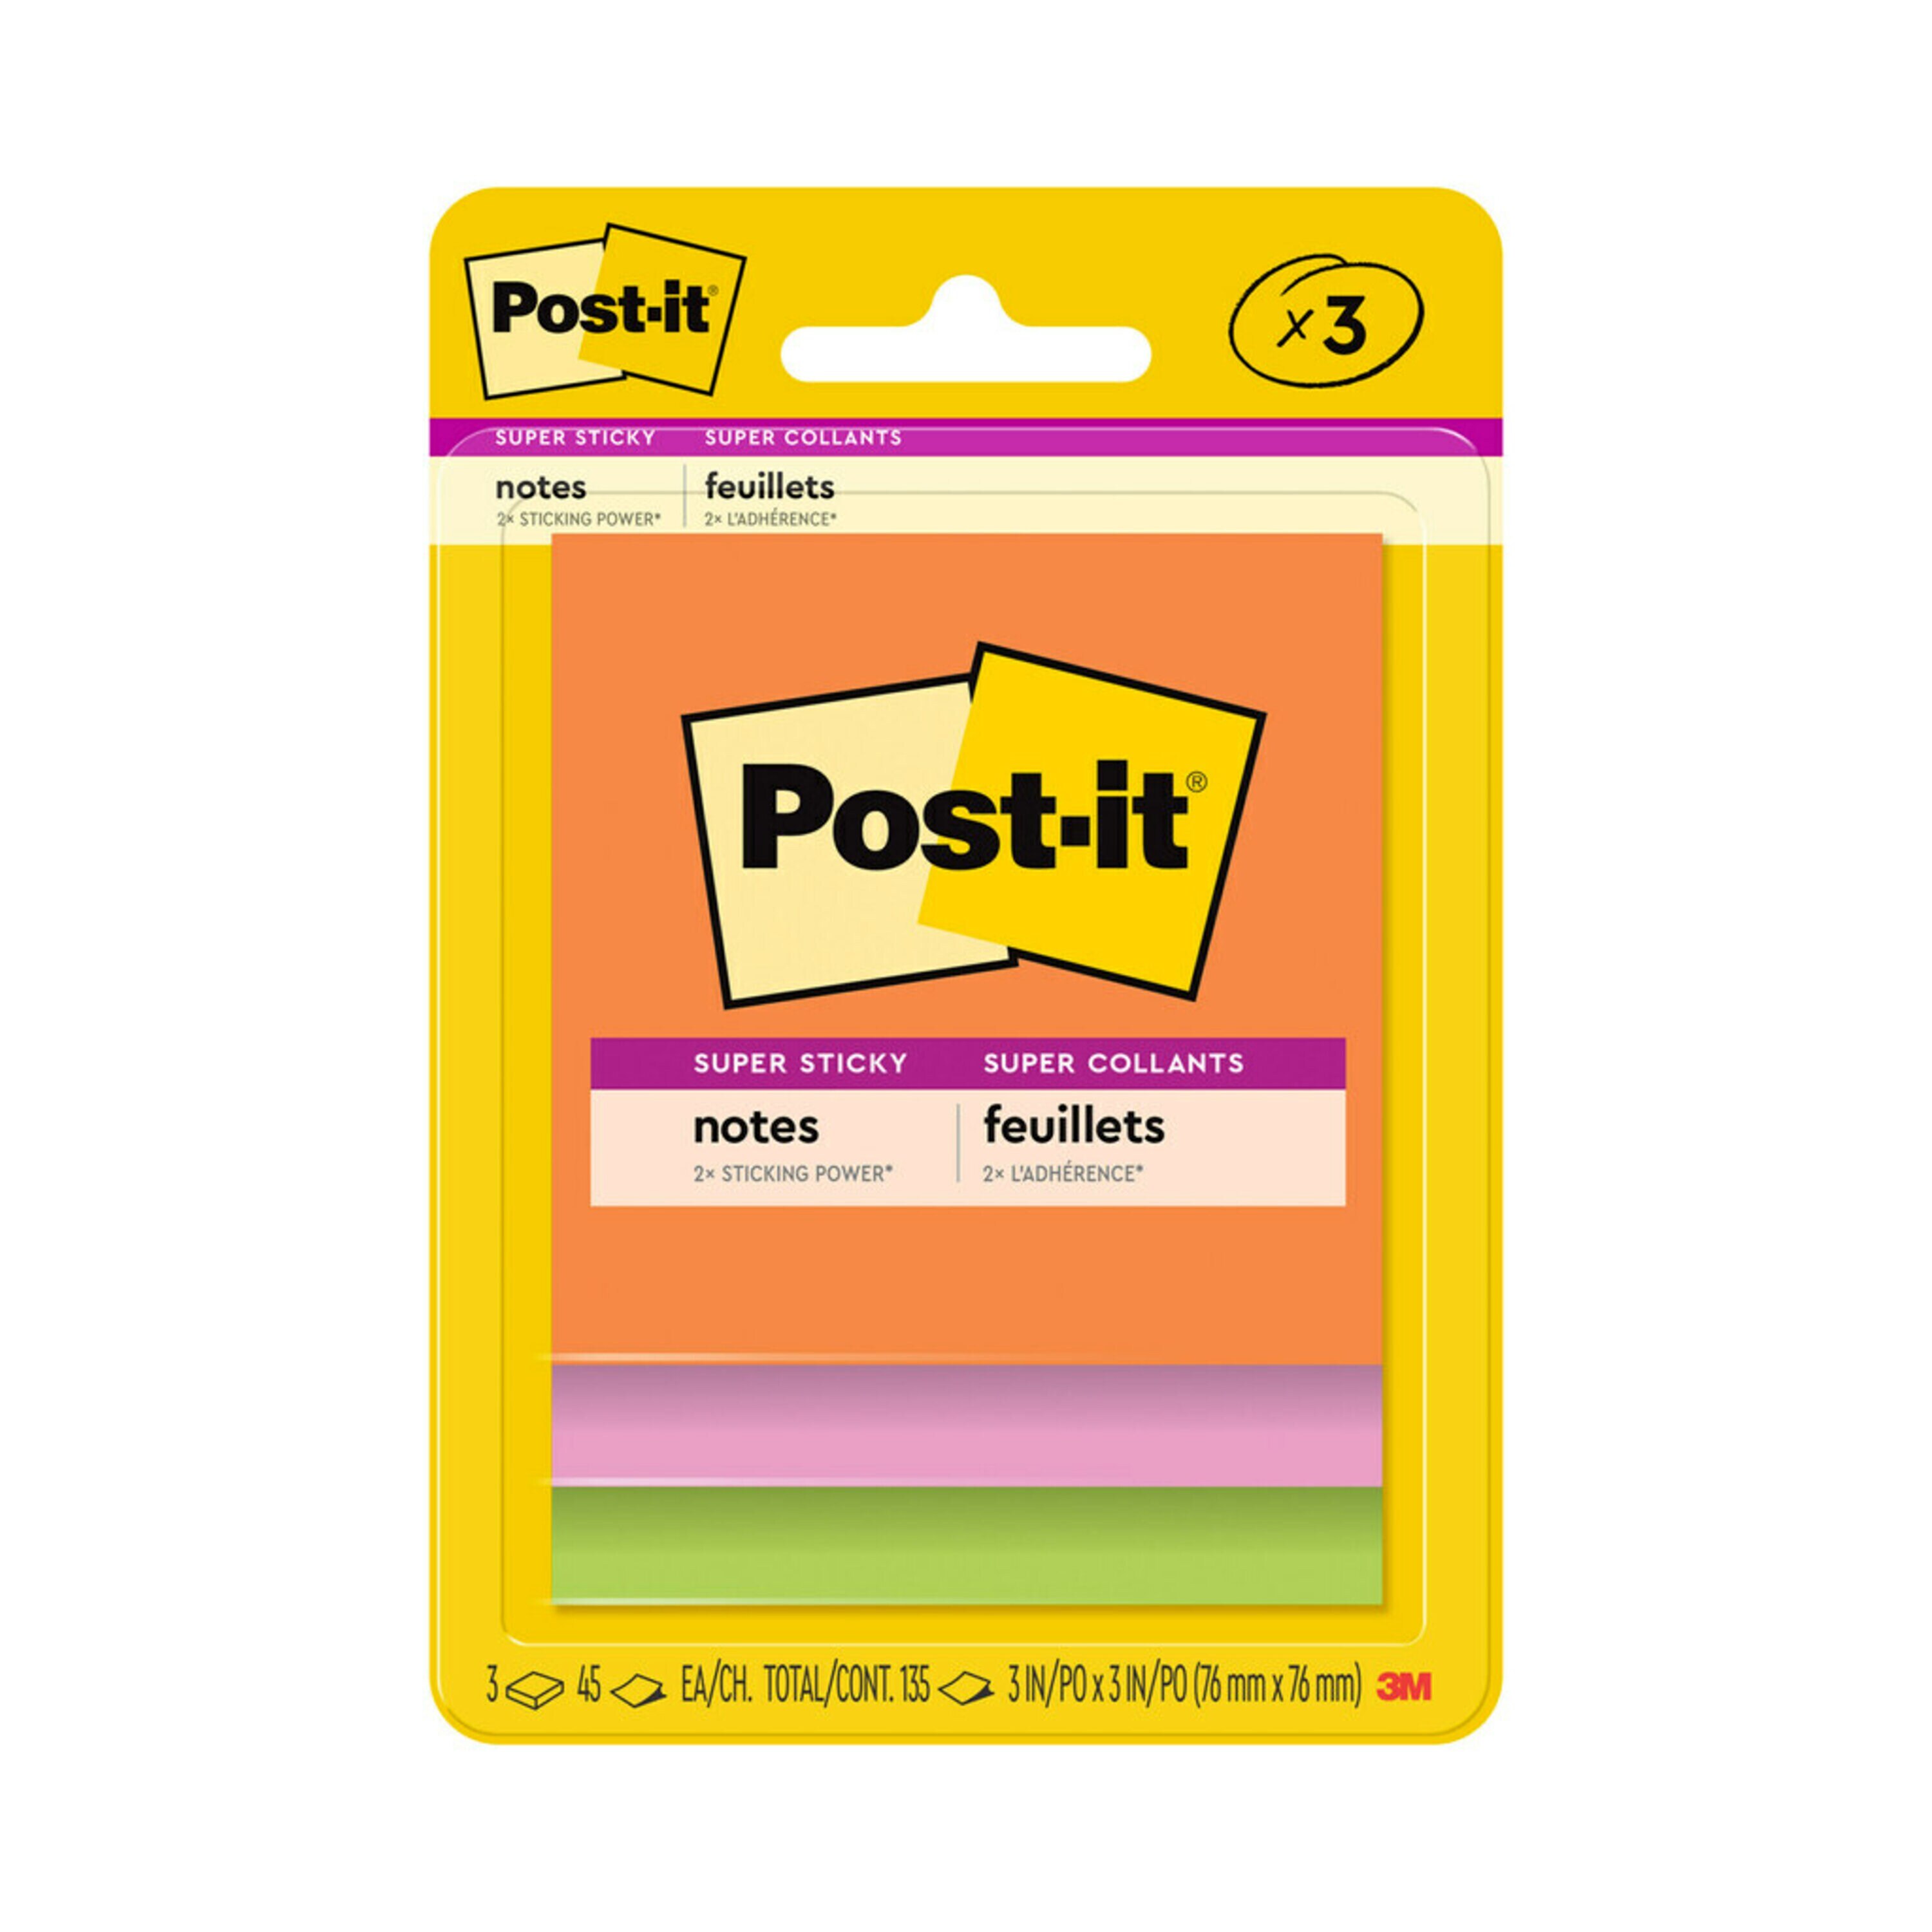 3M Post-it Super Sticky 3x3 Notes, 3 pack